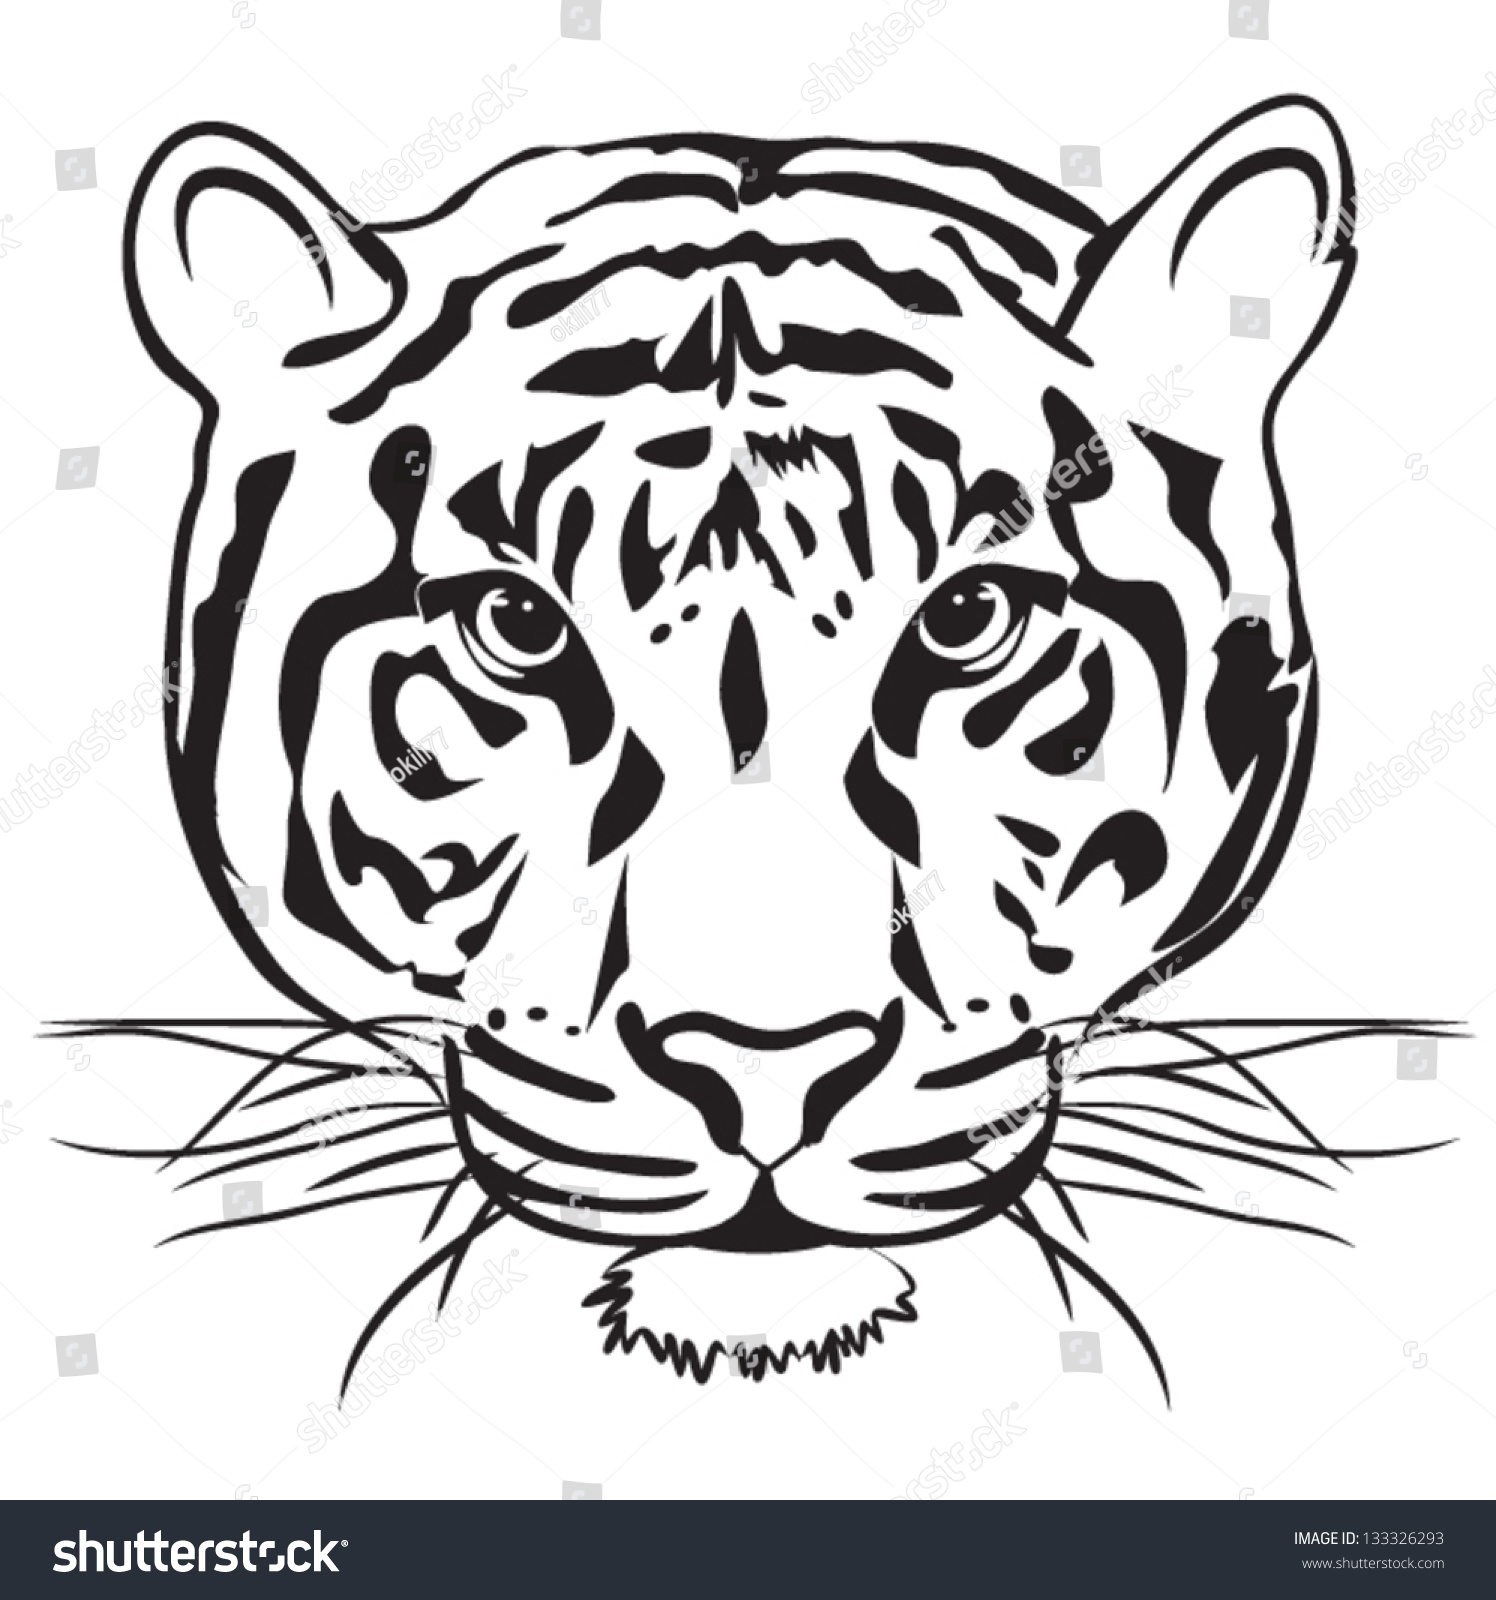 tiger clipart outline - photo #35